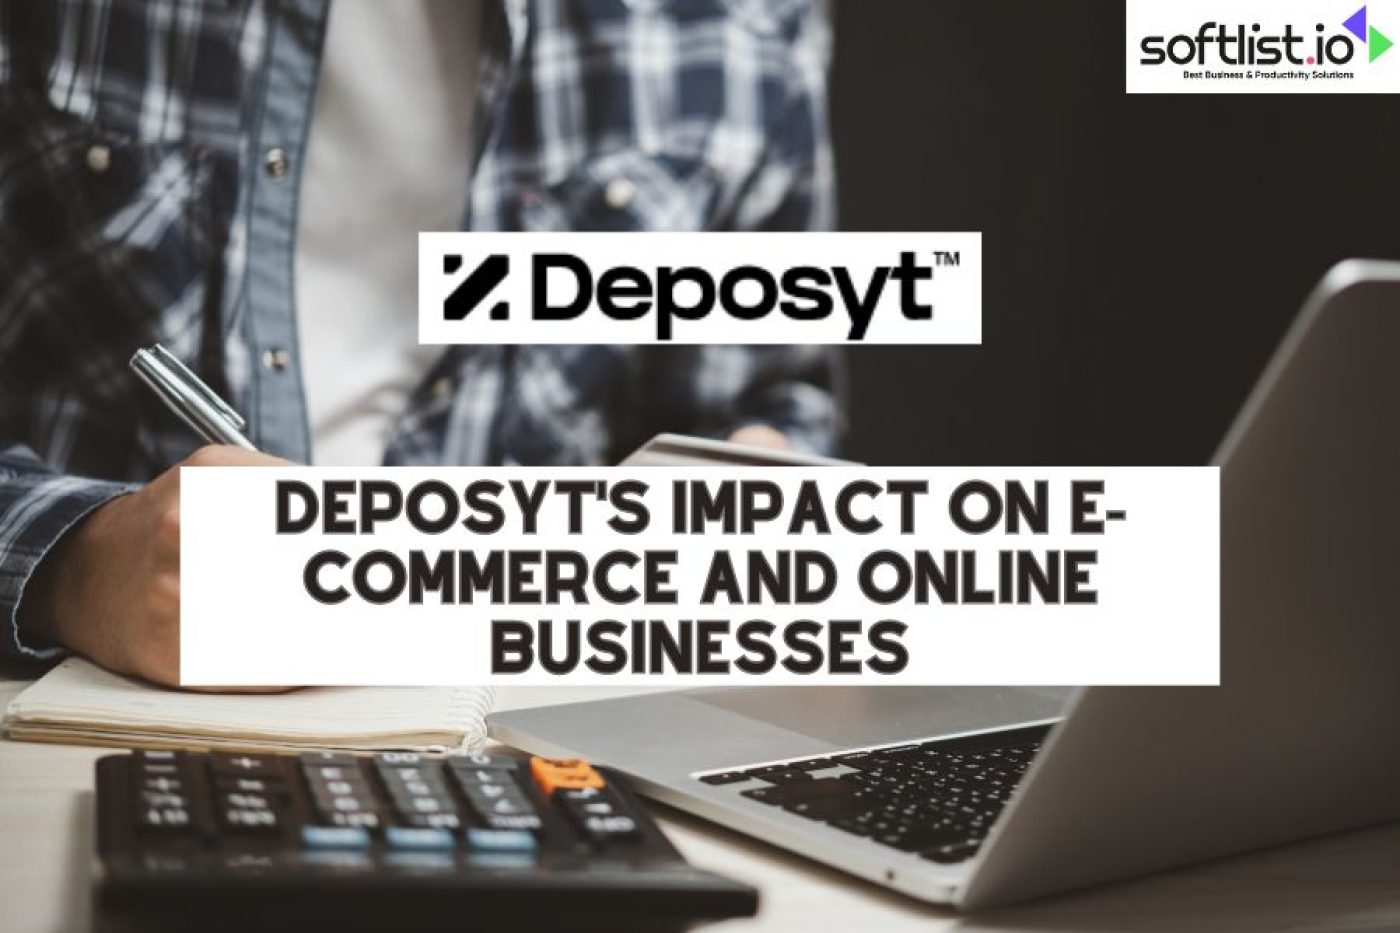 Deposyt's Impact on E-commerce and Online Businesses